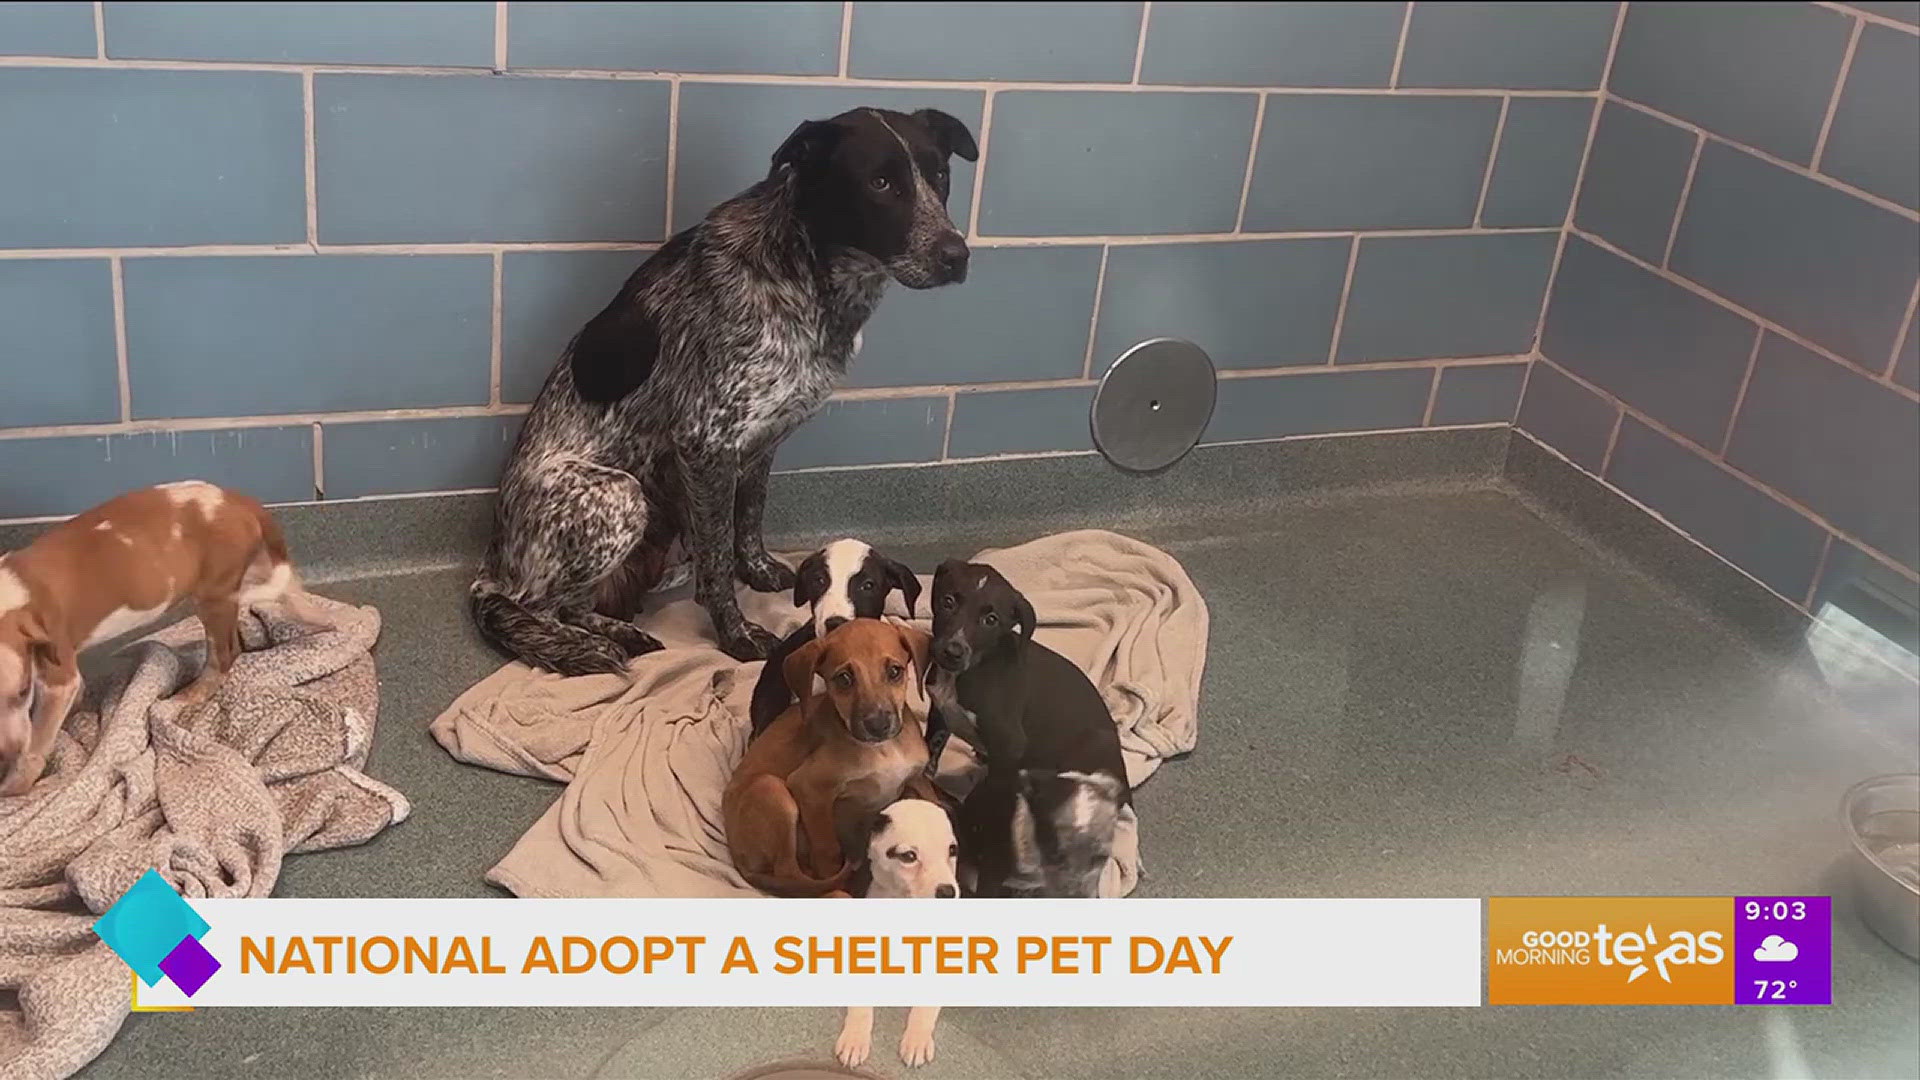 Sarah Sheek of Dallas Animal Services updates the animal shelter capacity situation and offers tips for people looking to adopt a pet.